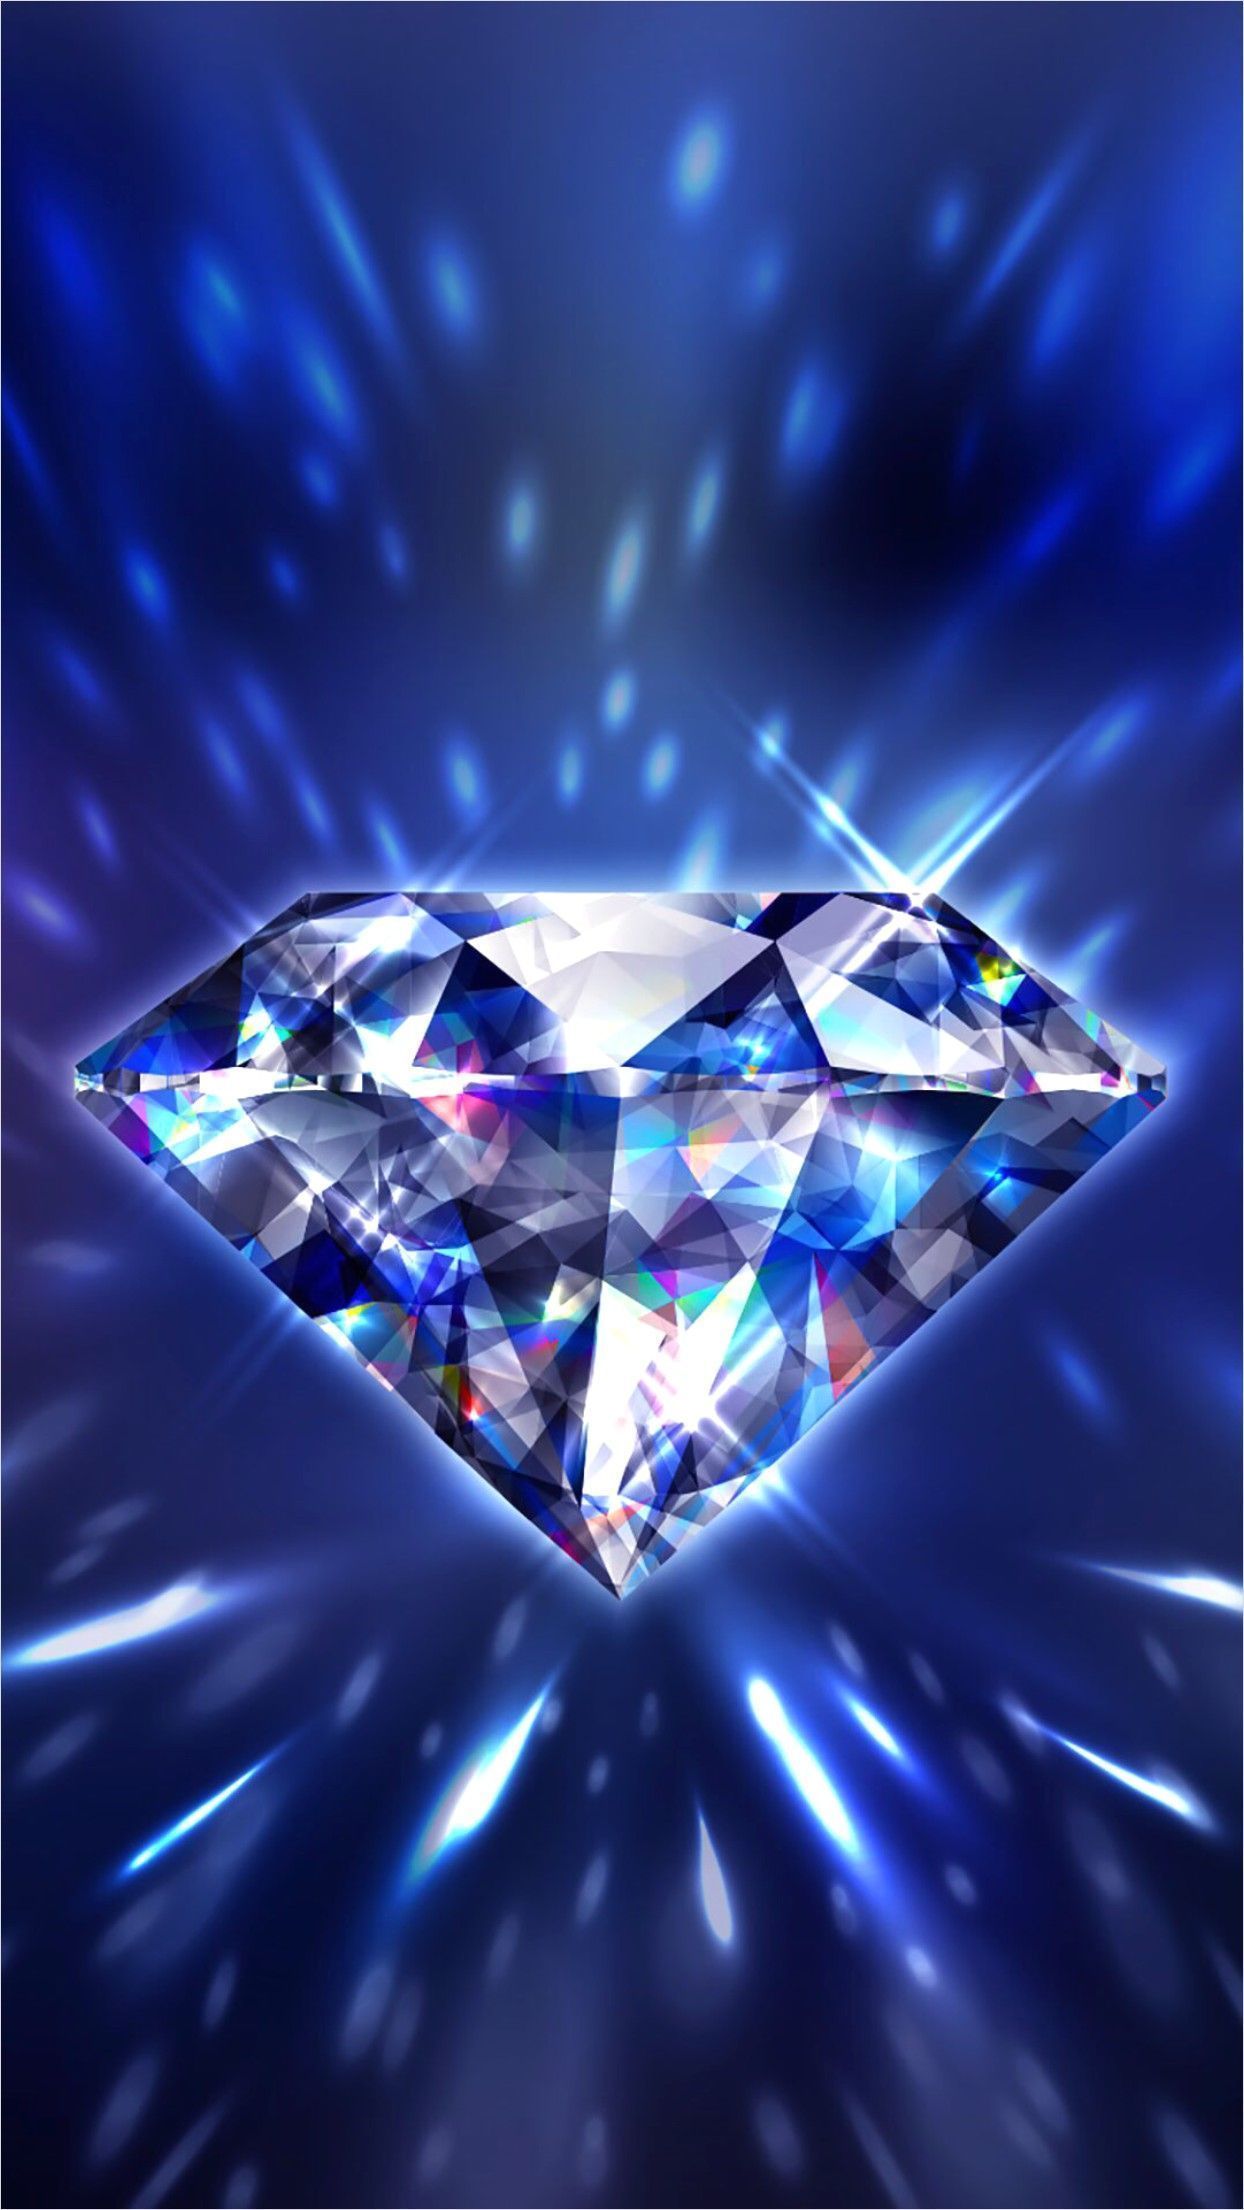 A diamond with blue light rays coming out of it - Diamond